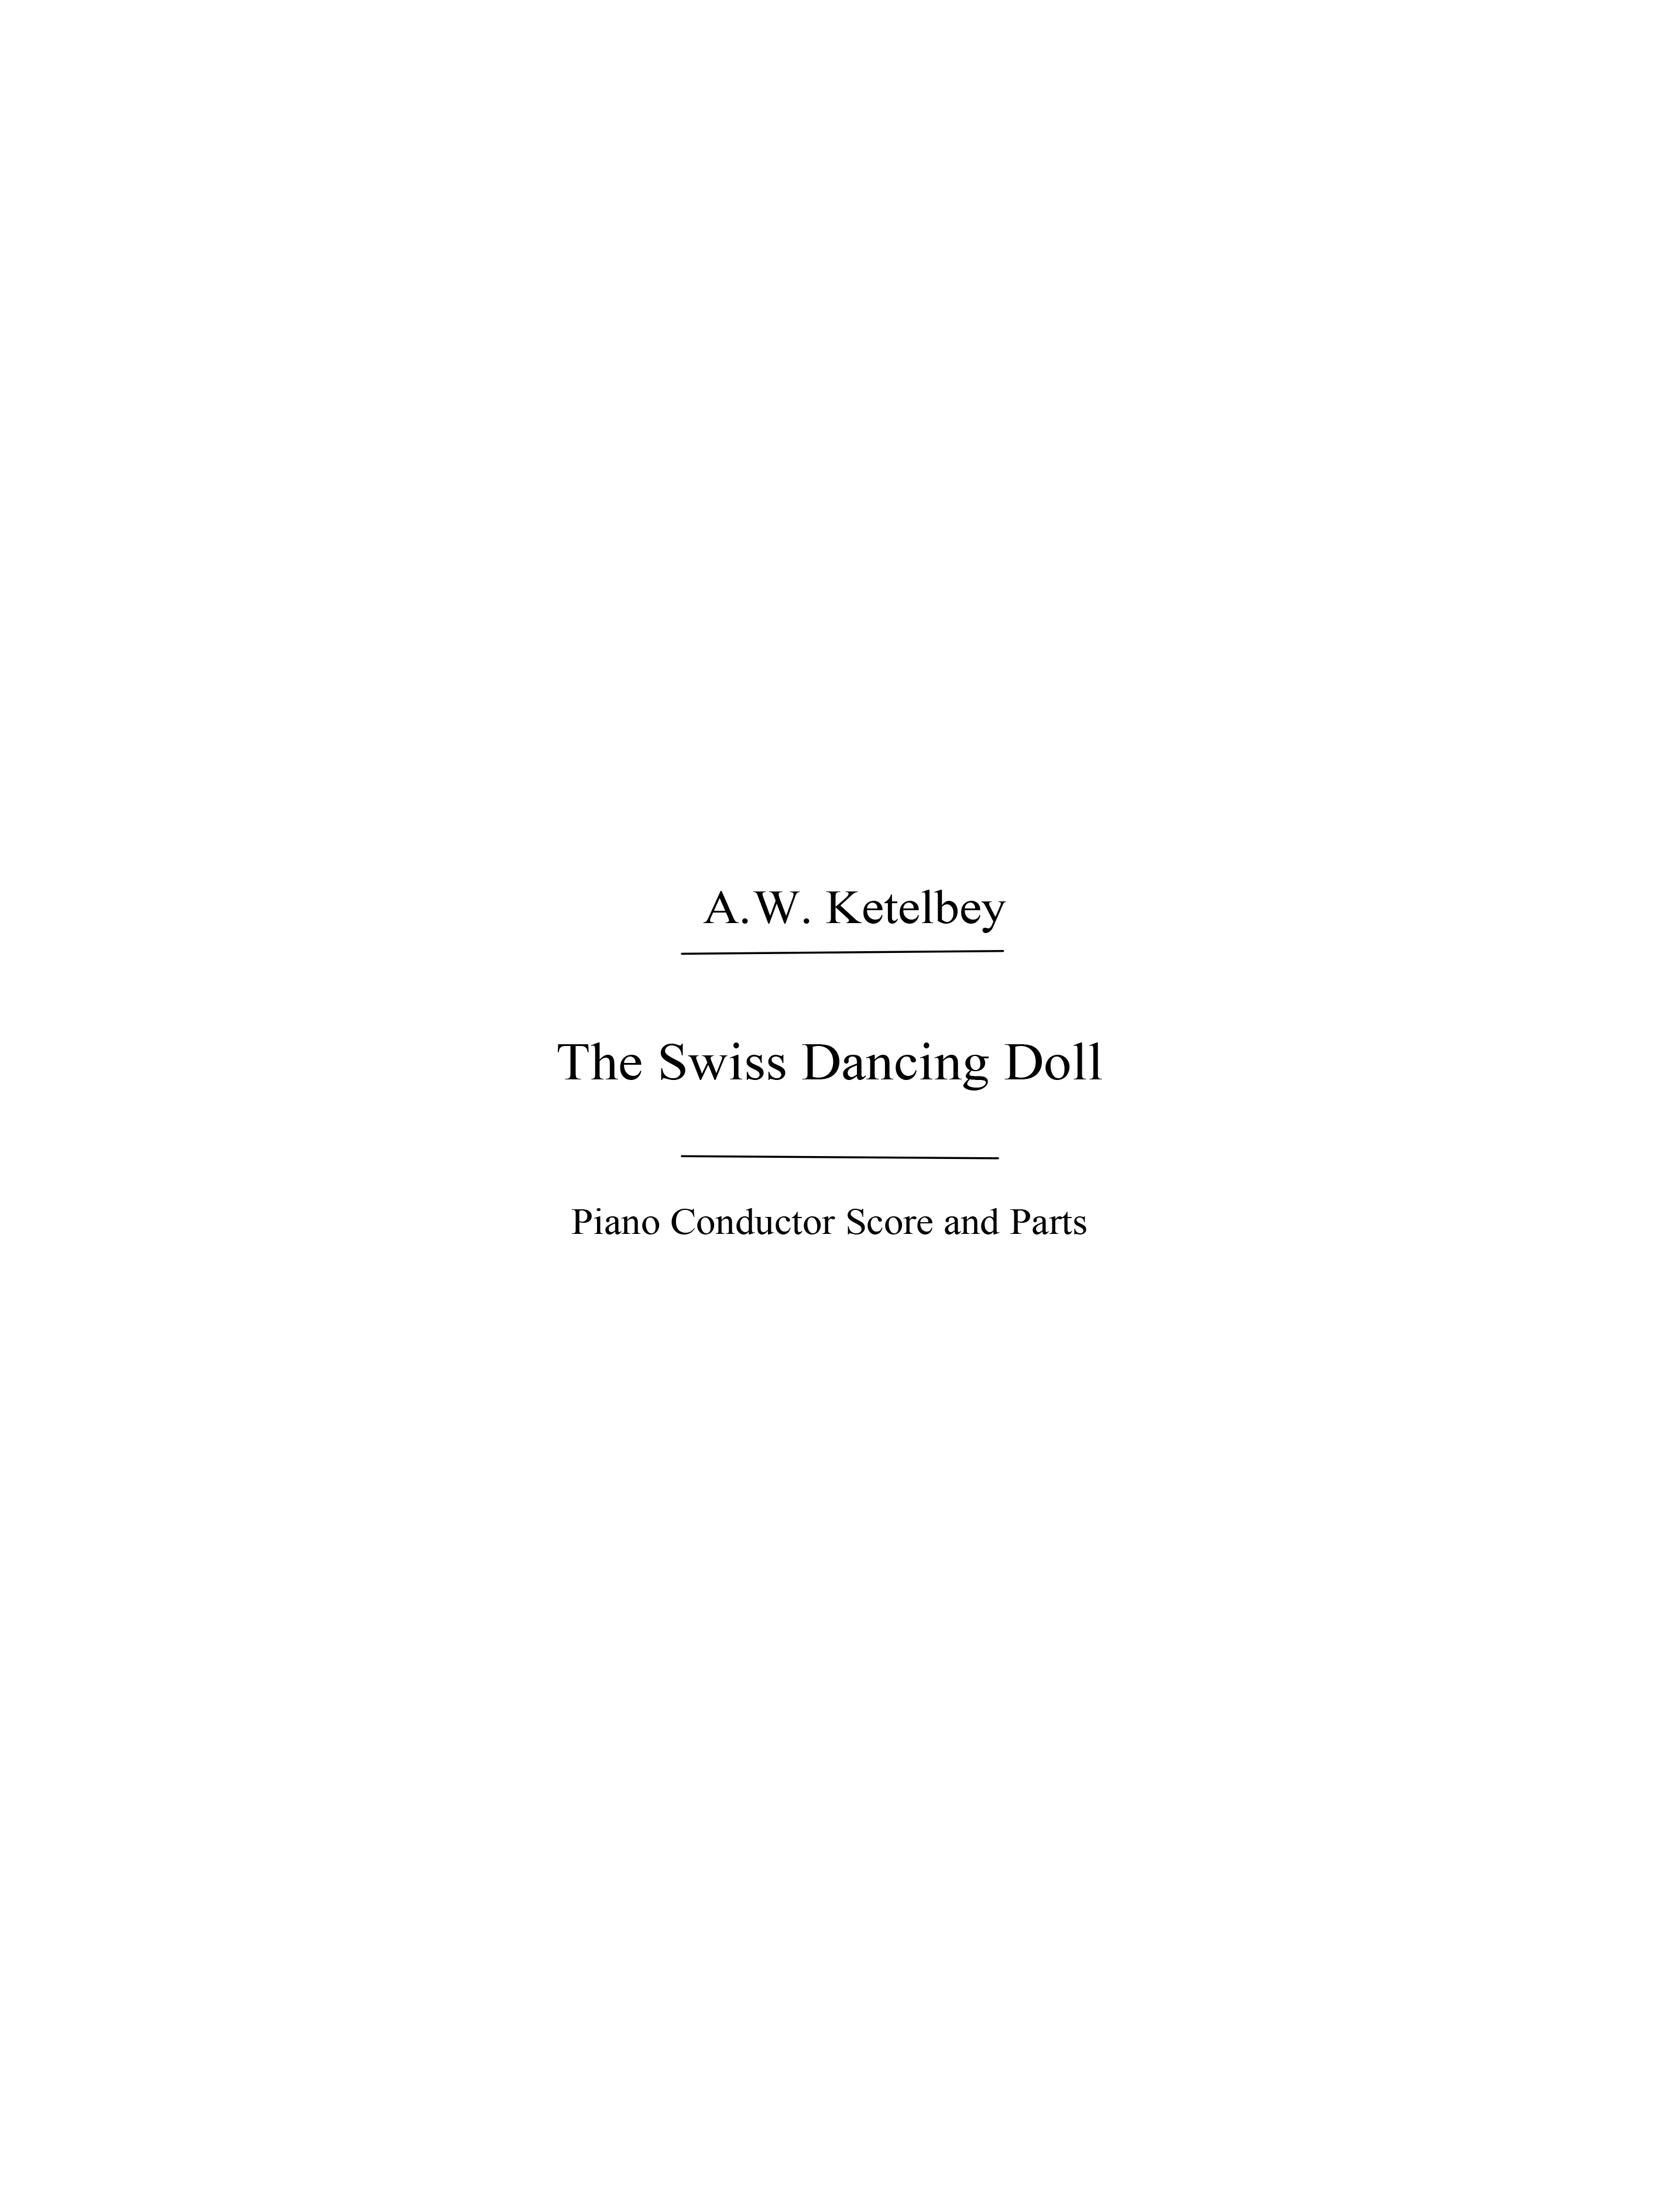 Ketelbey, Aw The Swiss Dancing Doll Orch Pf Sc/Pts